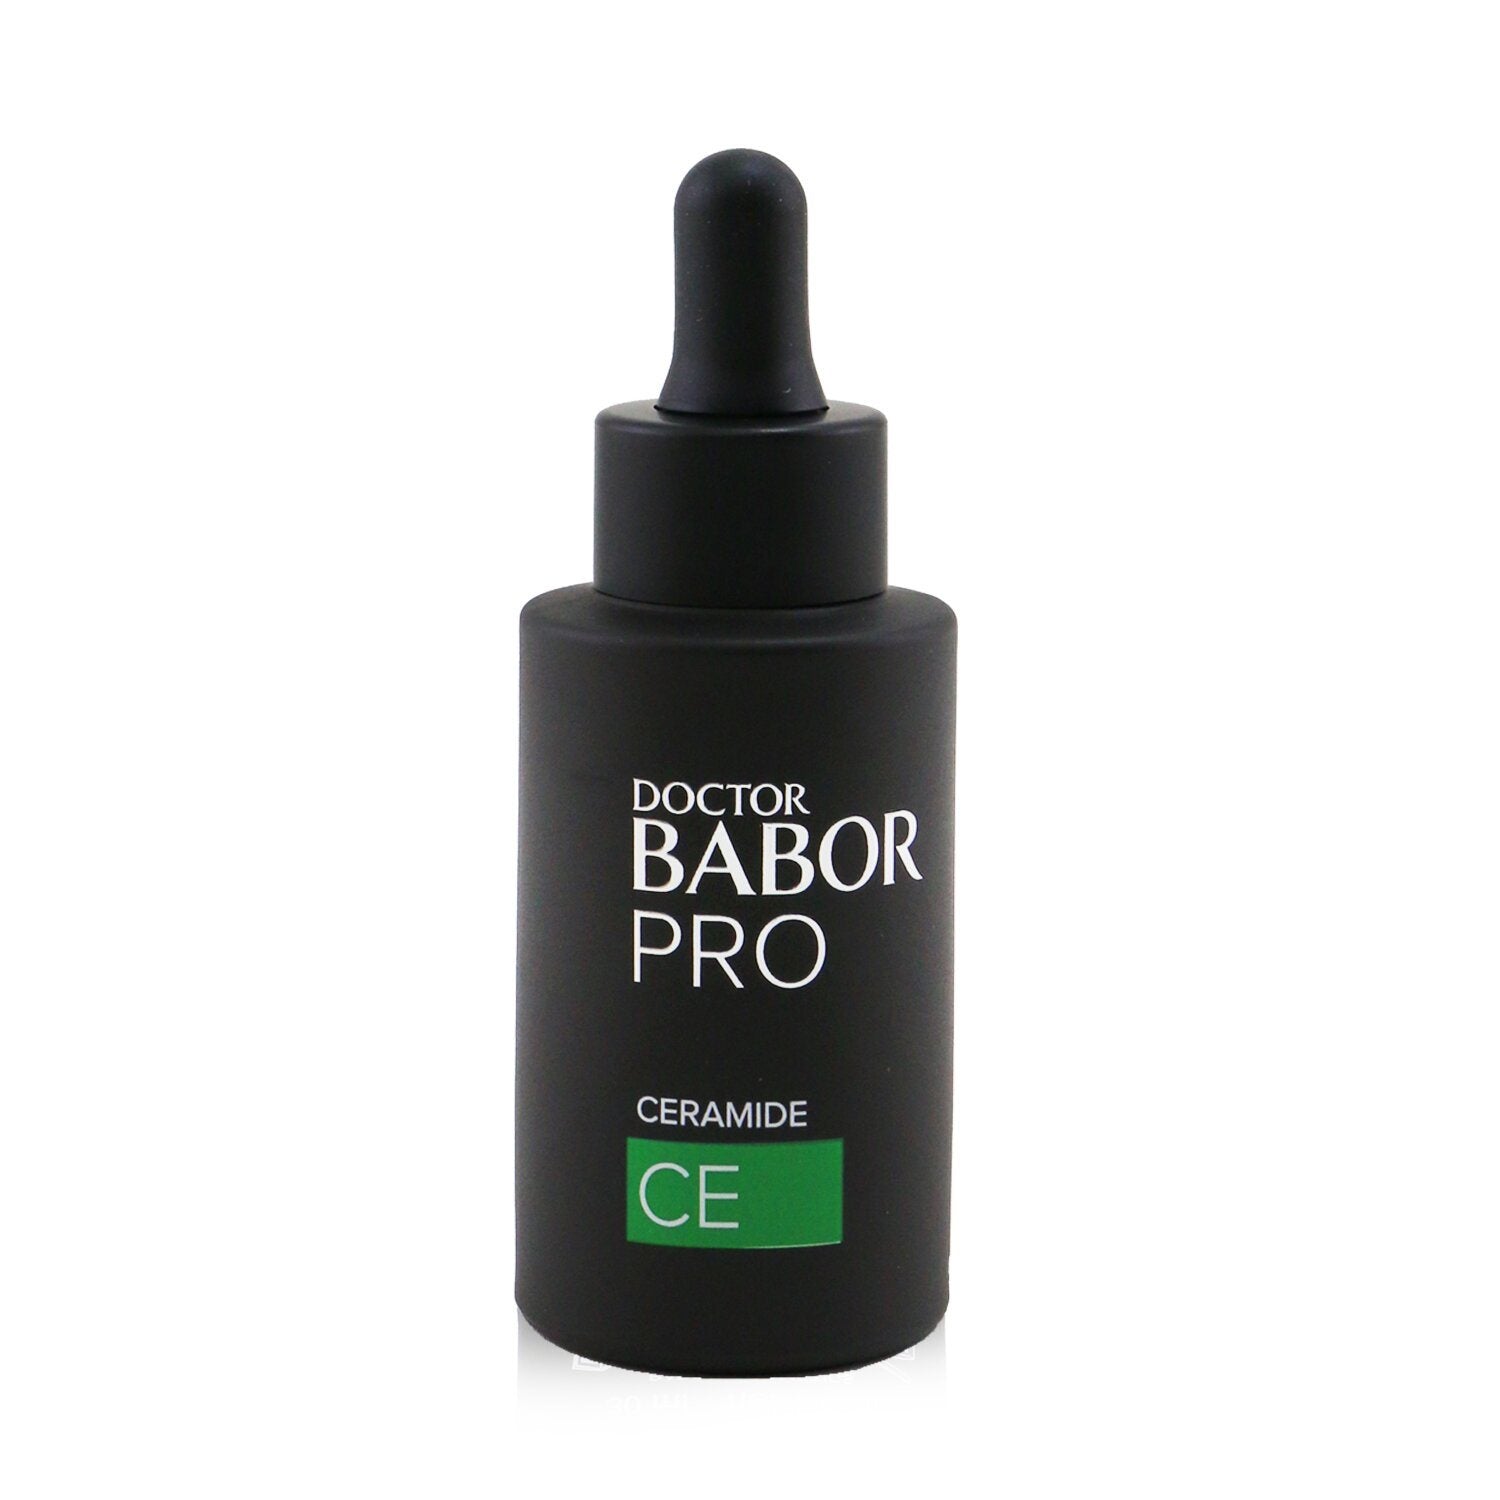 BABOR - Doctor Babor Pro CE Ceramide Concentrate - 30ml/1oz 3P's Inclusive Beauty